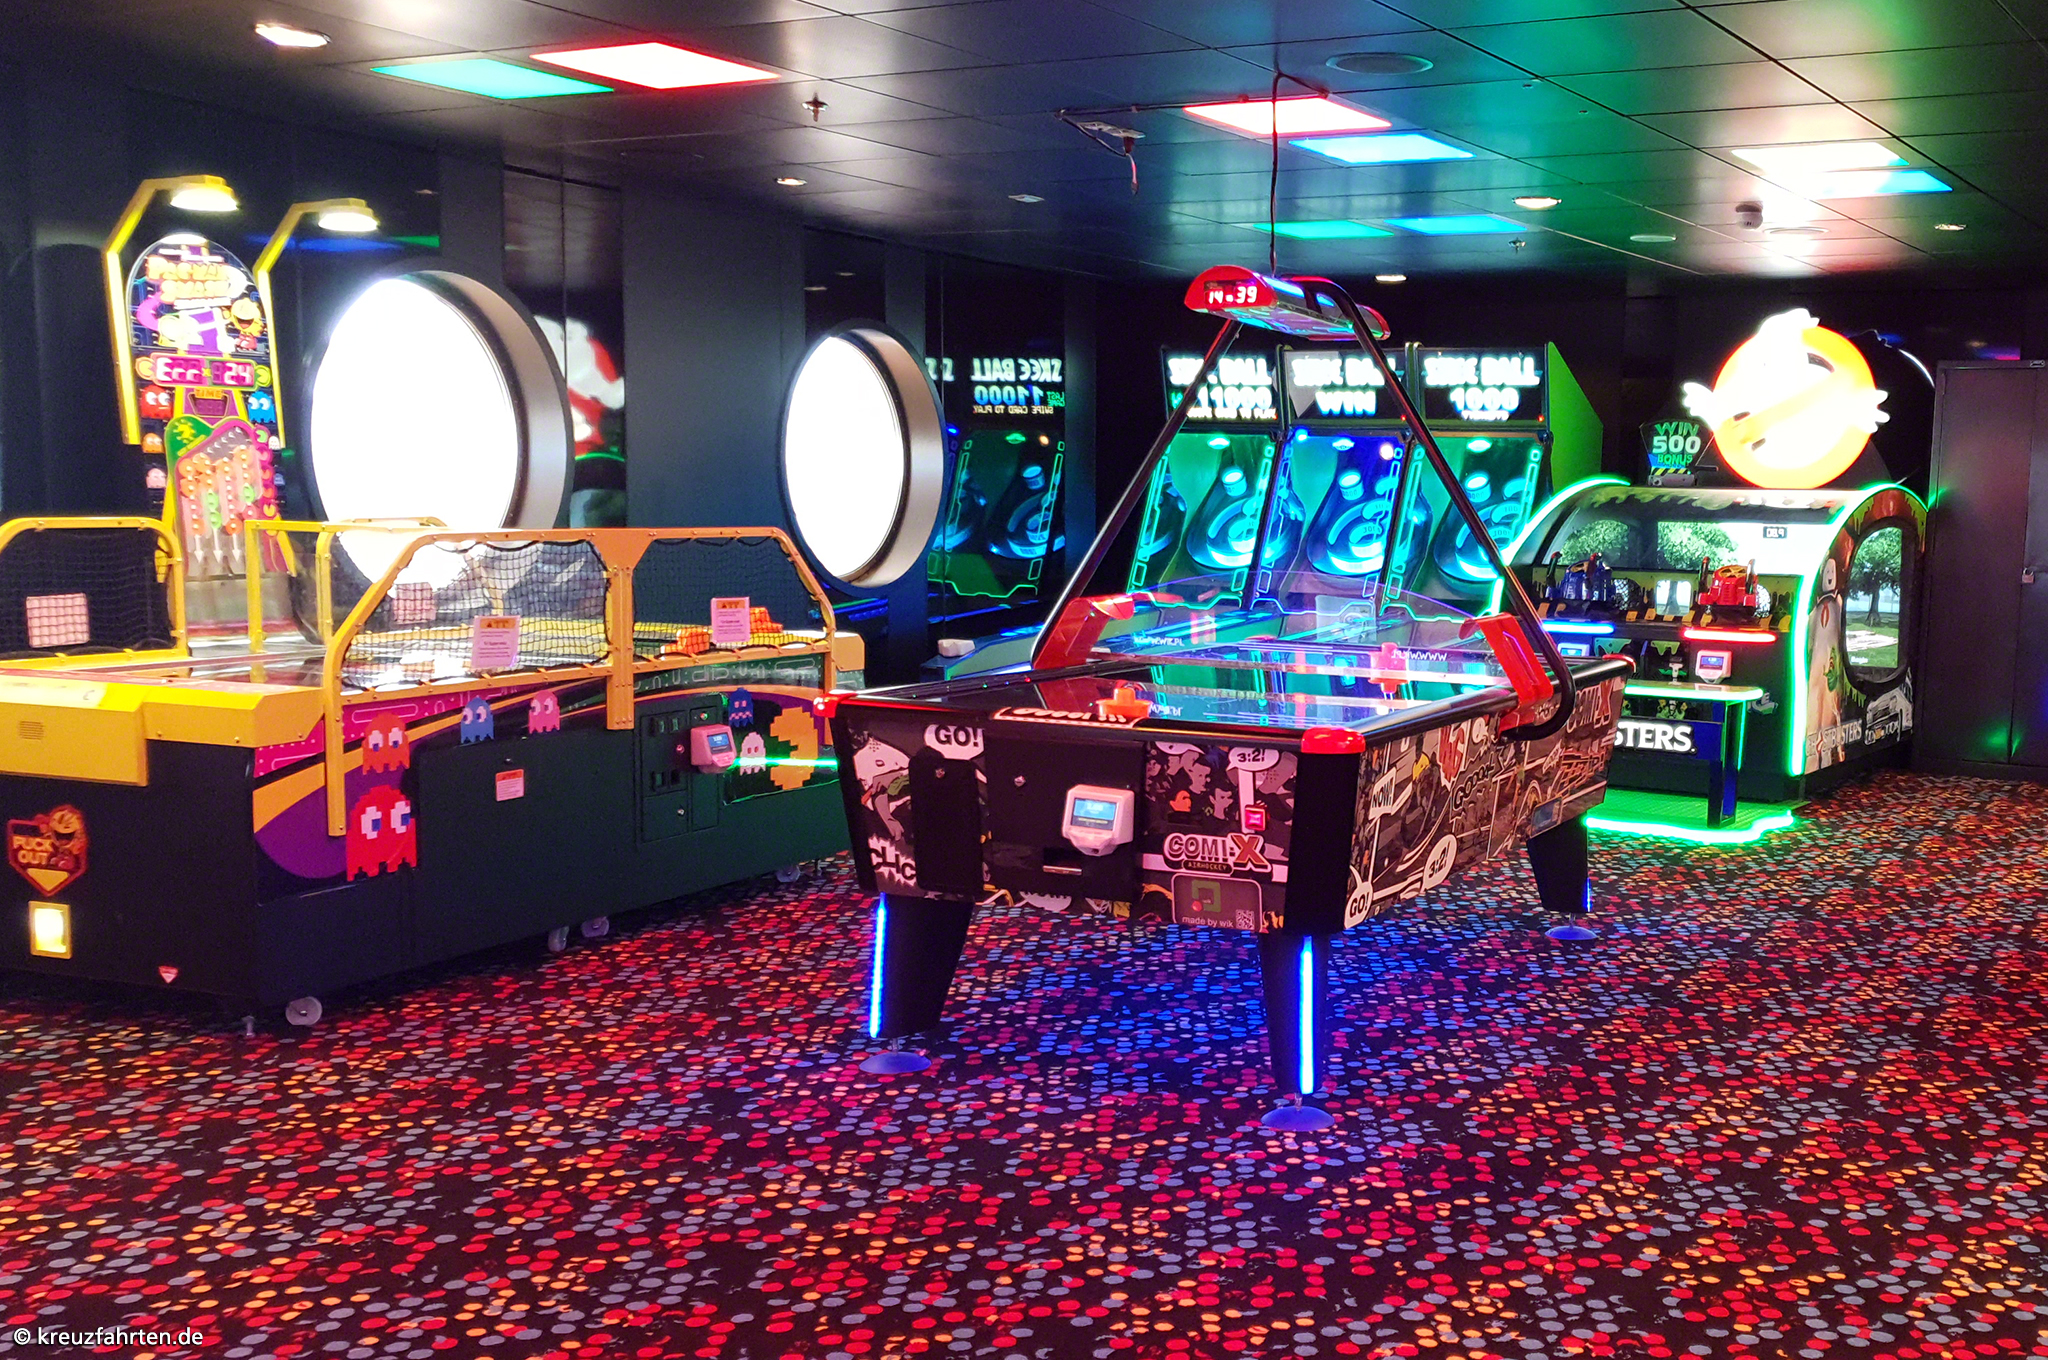 Playmakers Sports Bar & Arcade